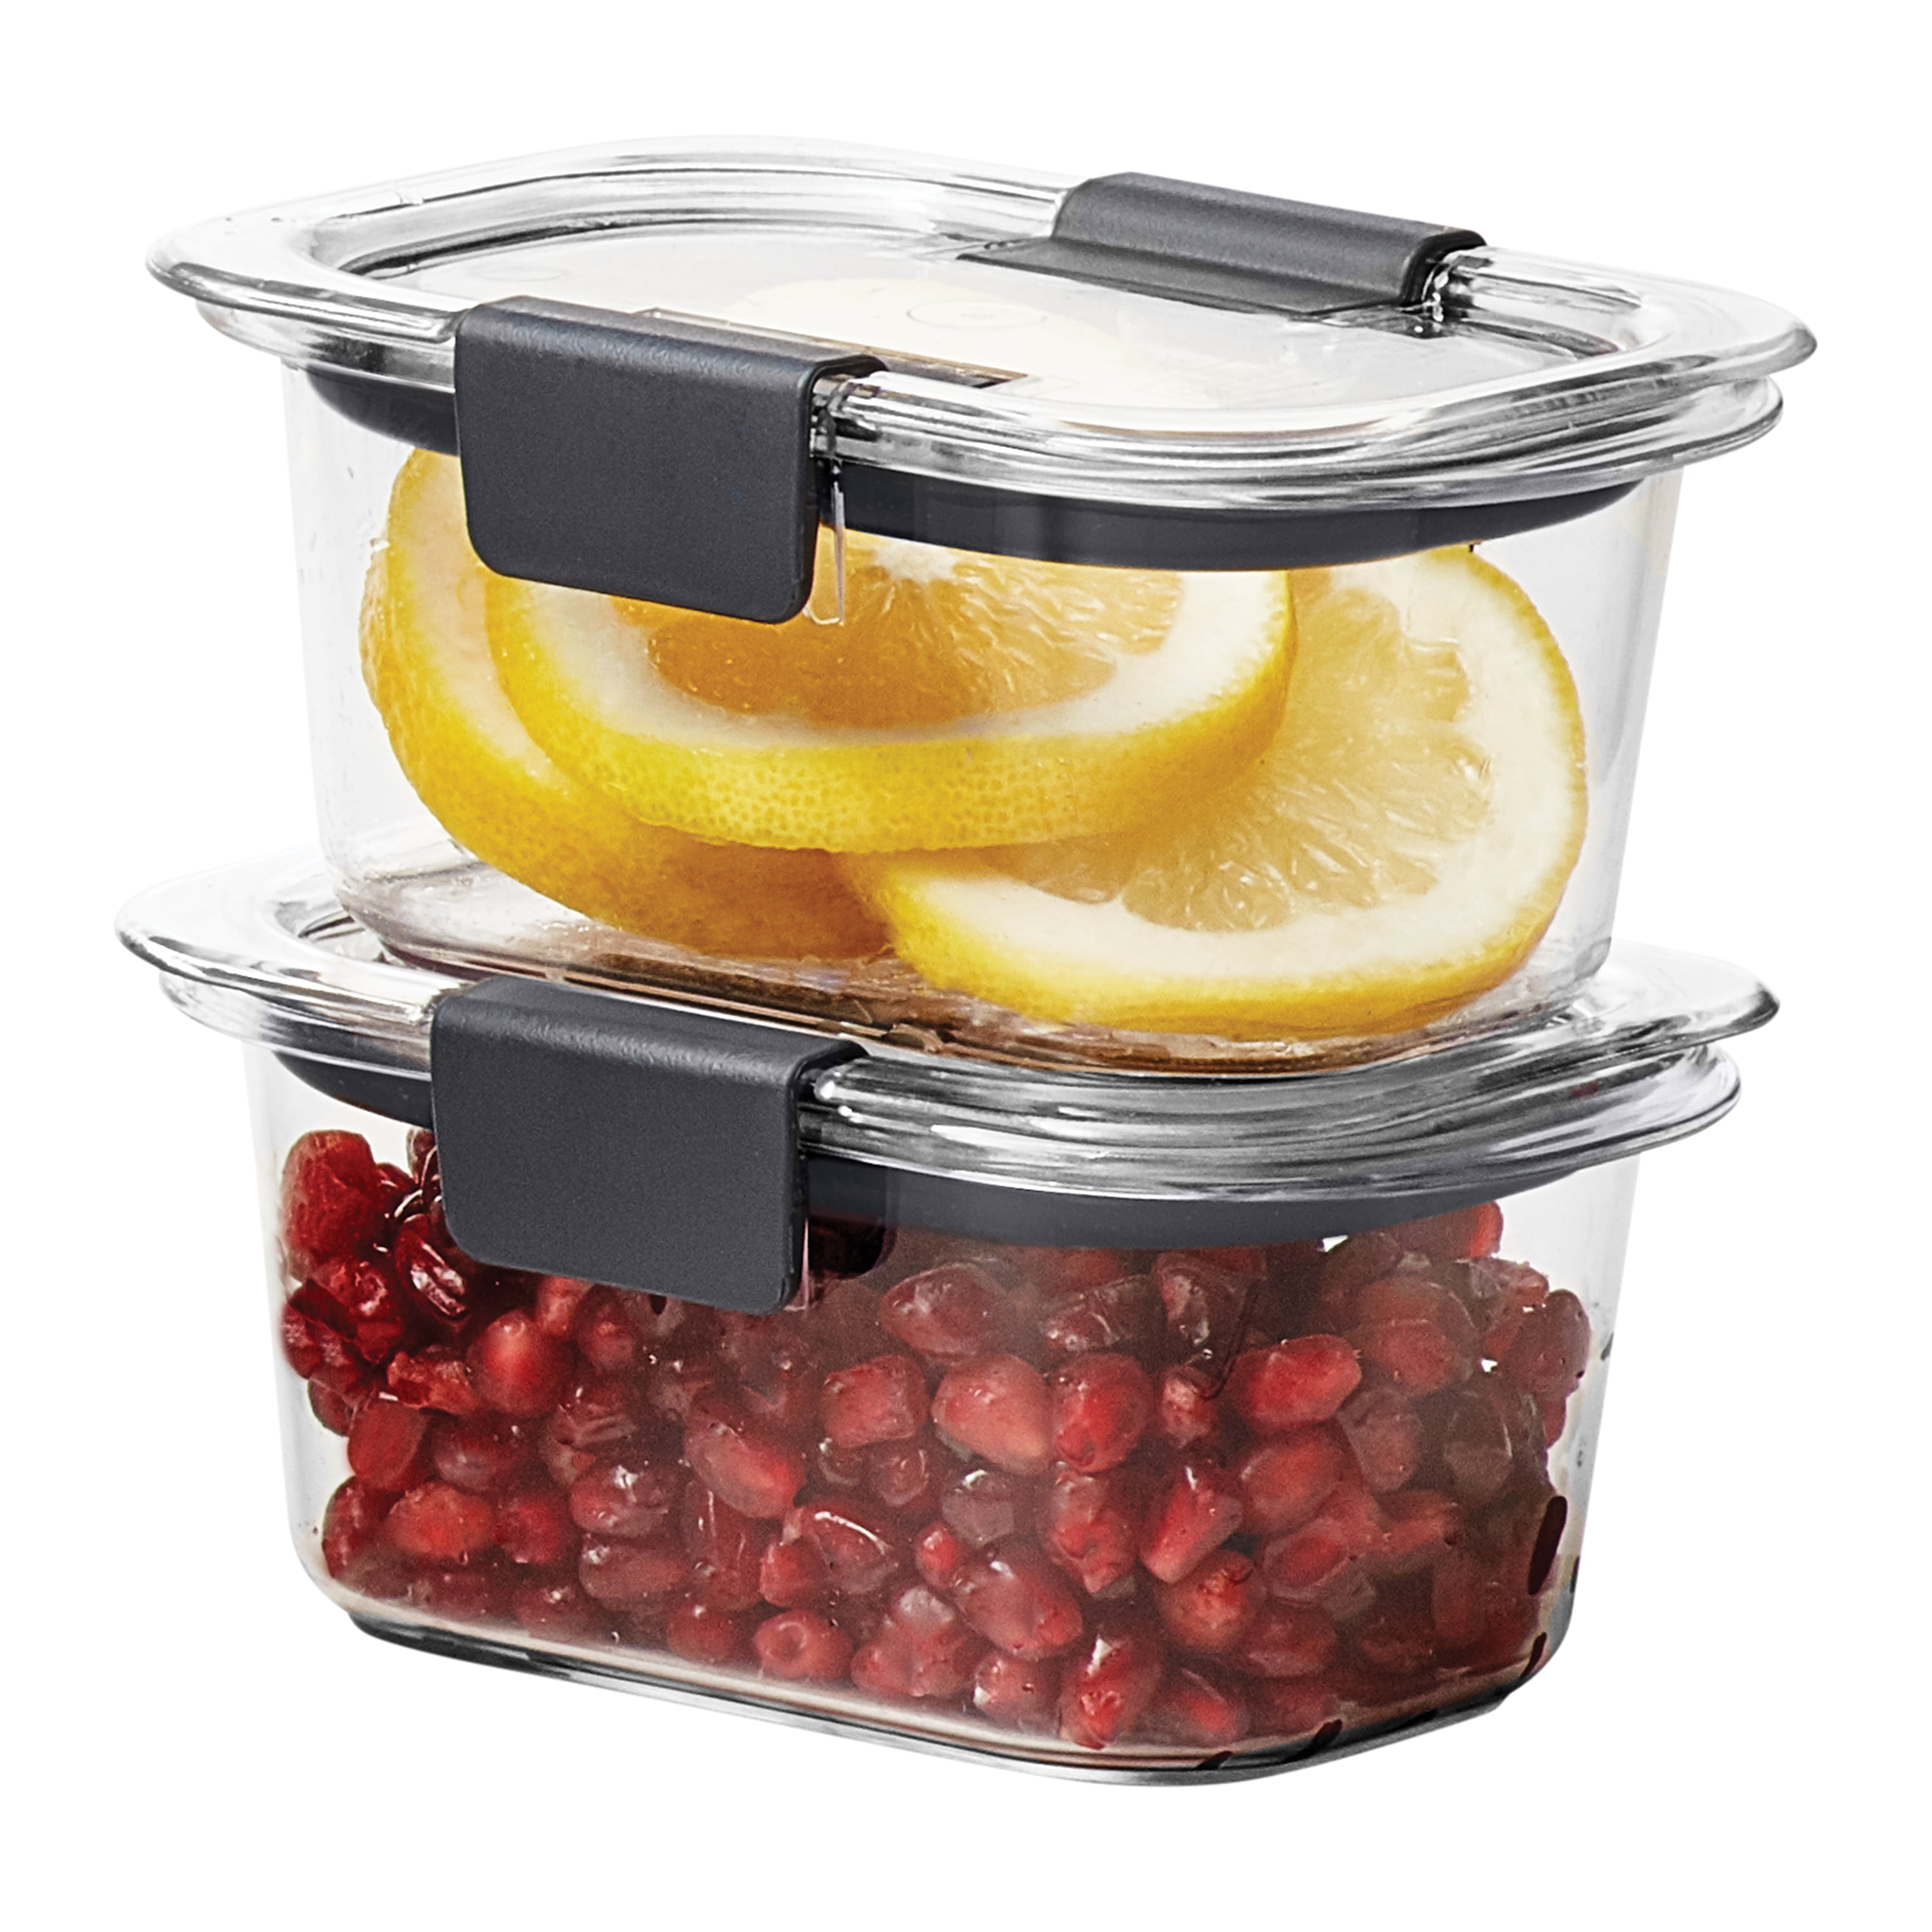  Rubbermaid Brilliance Food Storage Containers, Set of 8 -  Leakproof Glass Meal Prep Containers, Microwave & Oven Safe: Home & Kitchen